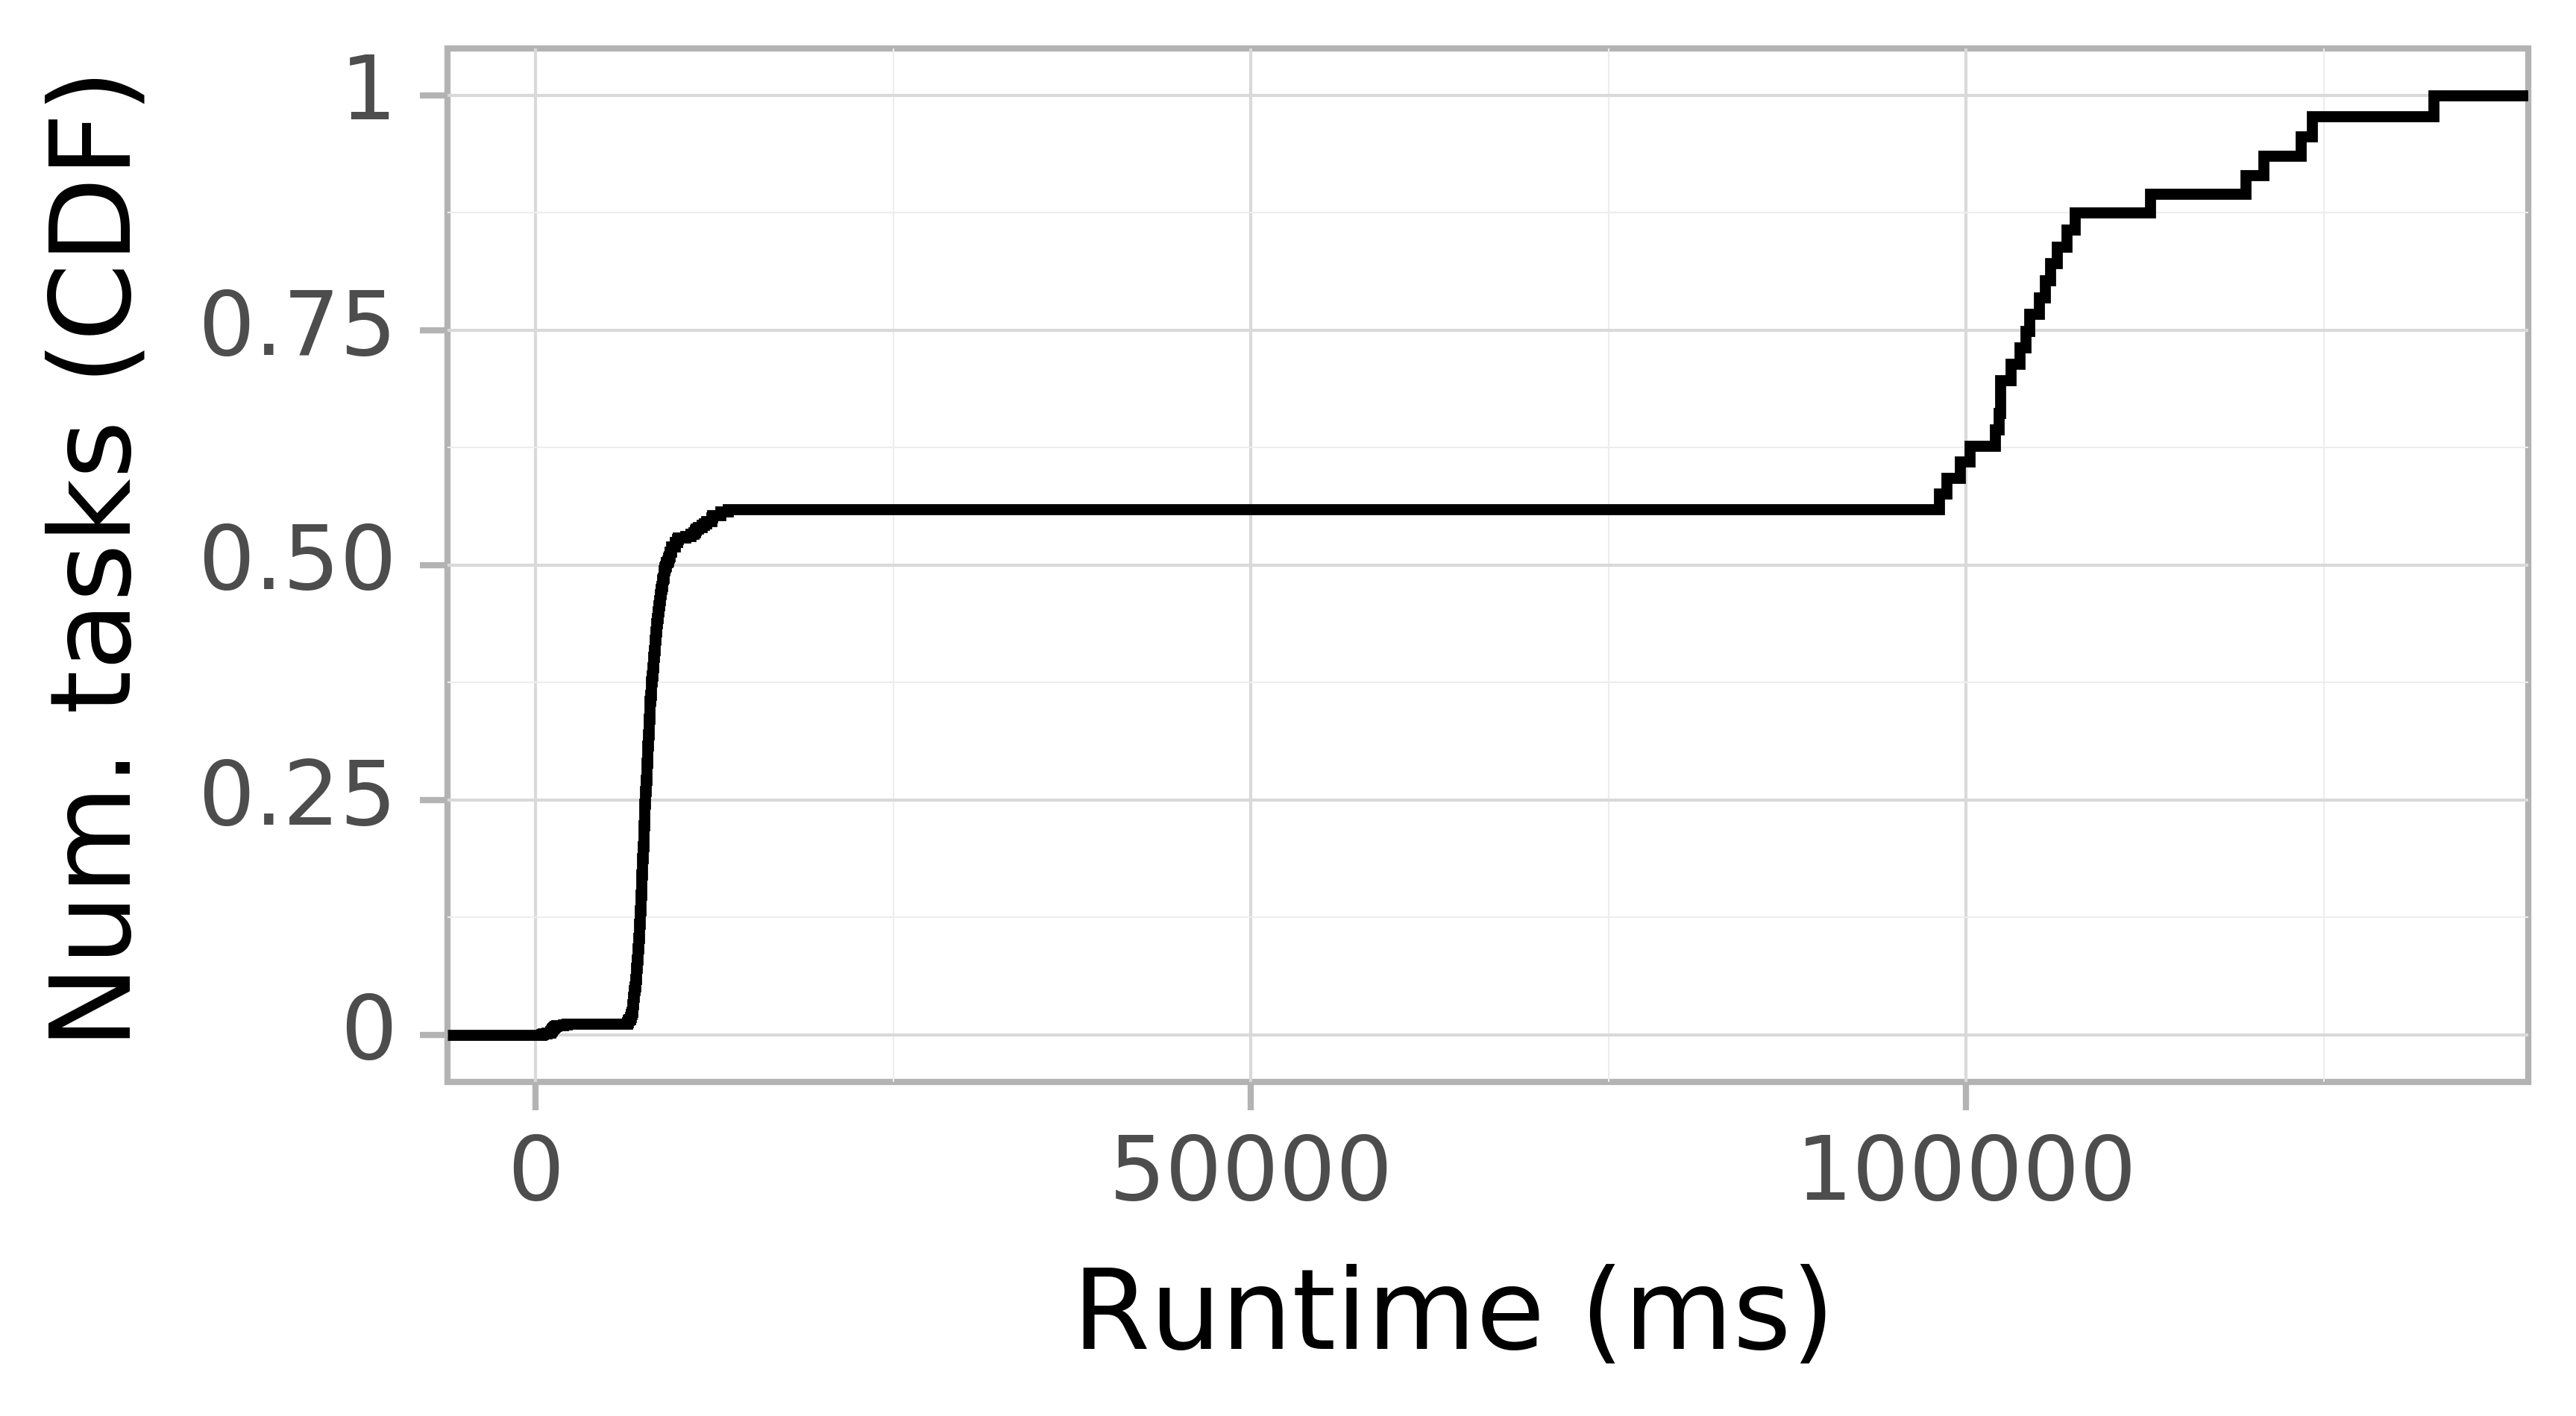 Task runtime CDF graph for the askalon-new_ee31 trace.